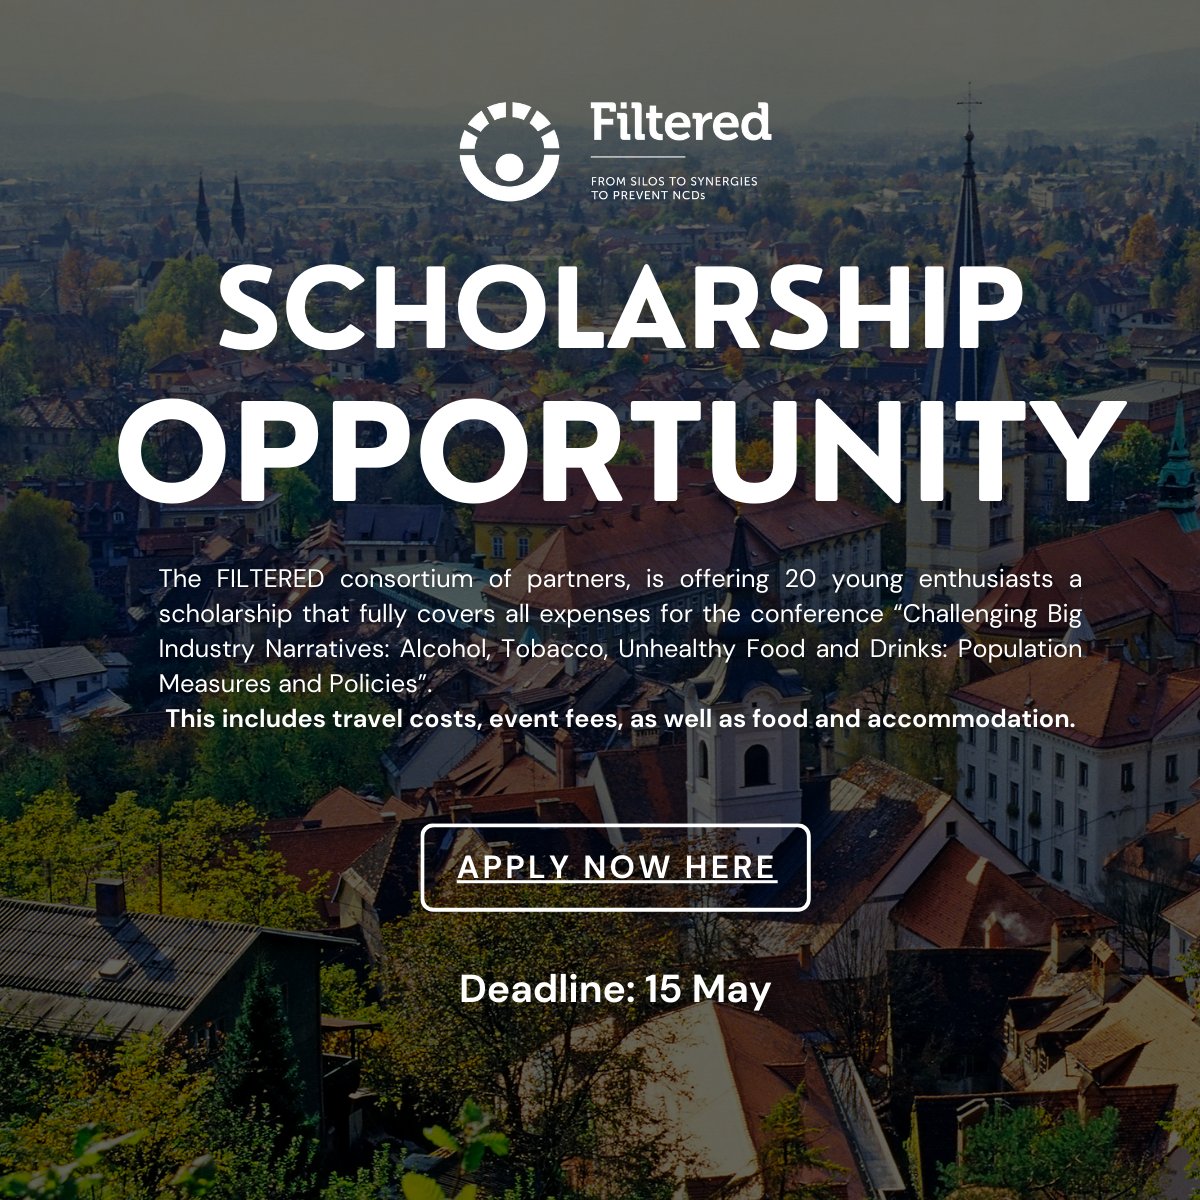 📣 #Filtered is offering 20 scholarships - covering travel, event fees, food & accommodation - to people aged under 35 for the conference 'Challenging Big Industry Narratives', which will take place on 27-28 June in Ljubljana 🇸🇮. Apply here by 15 May 👉 bit.ly/4b12h6l